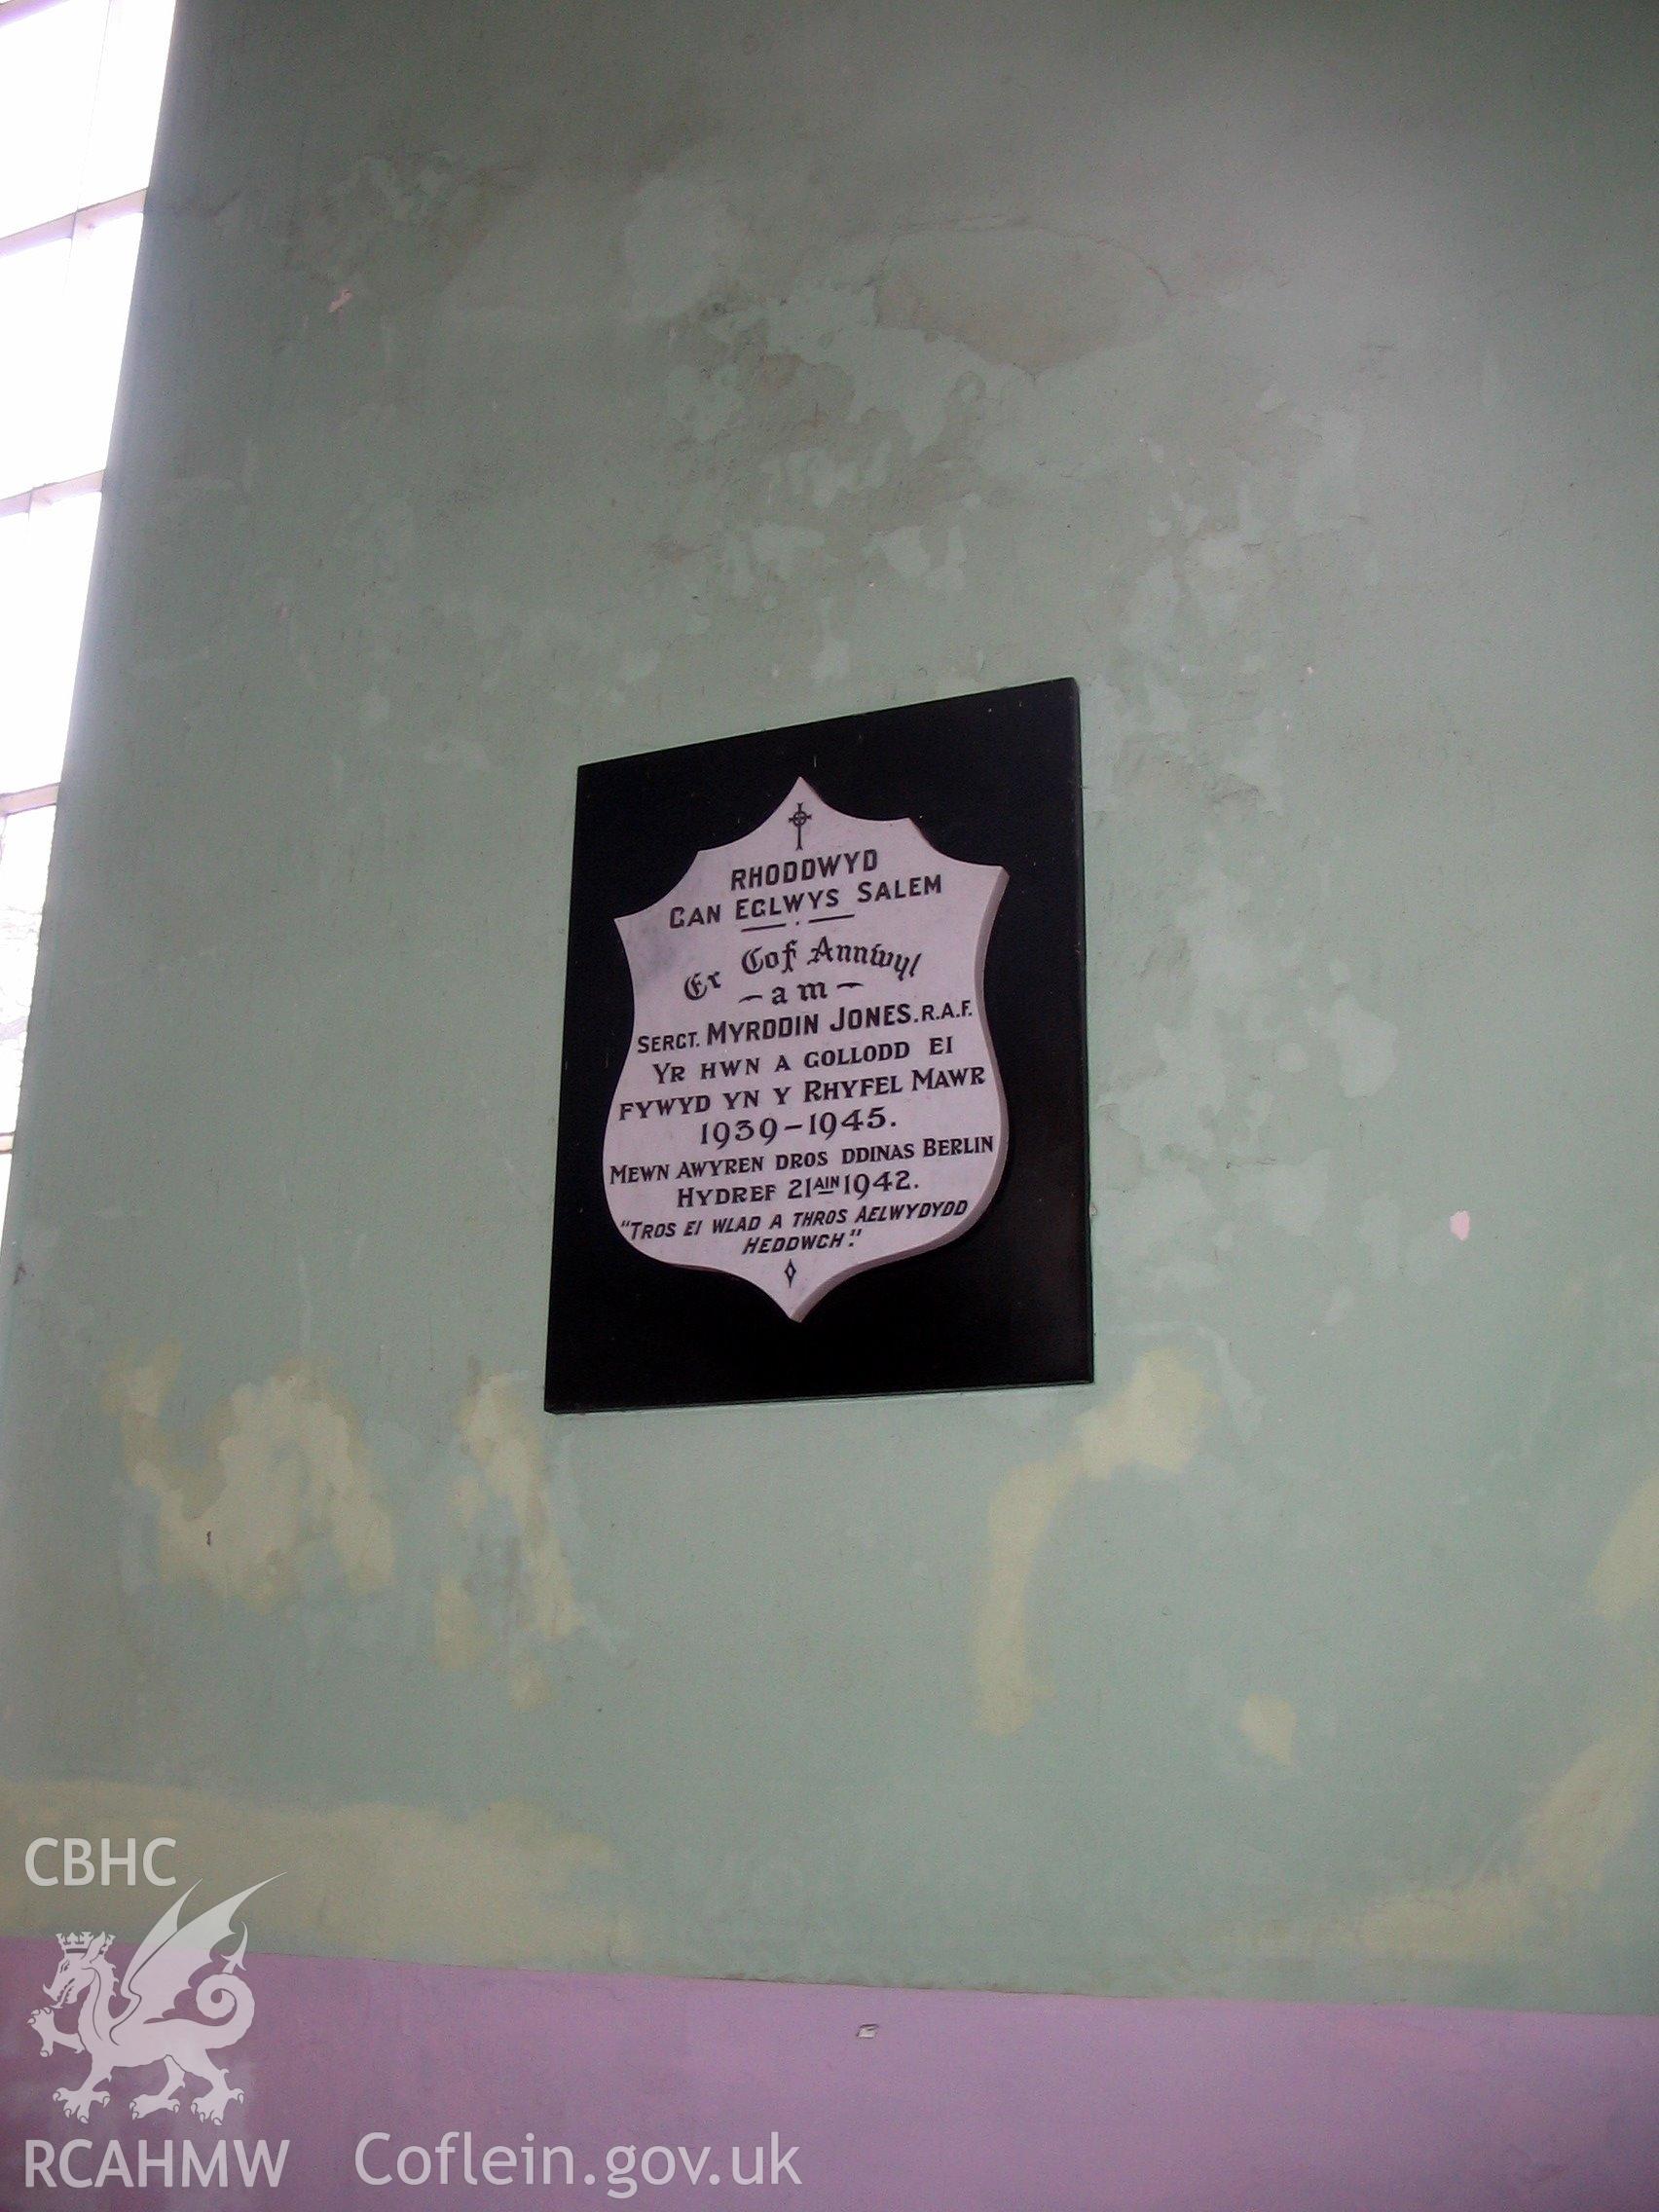 Colour digital photograph showing a plaque hanging on a wall inside Salem Welsh Independent Chapel, Trefeurig.